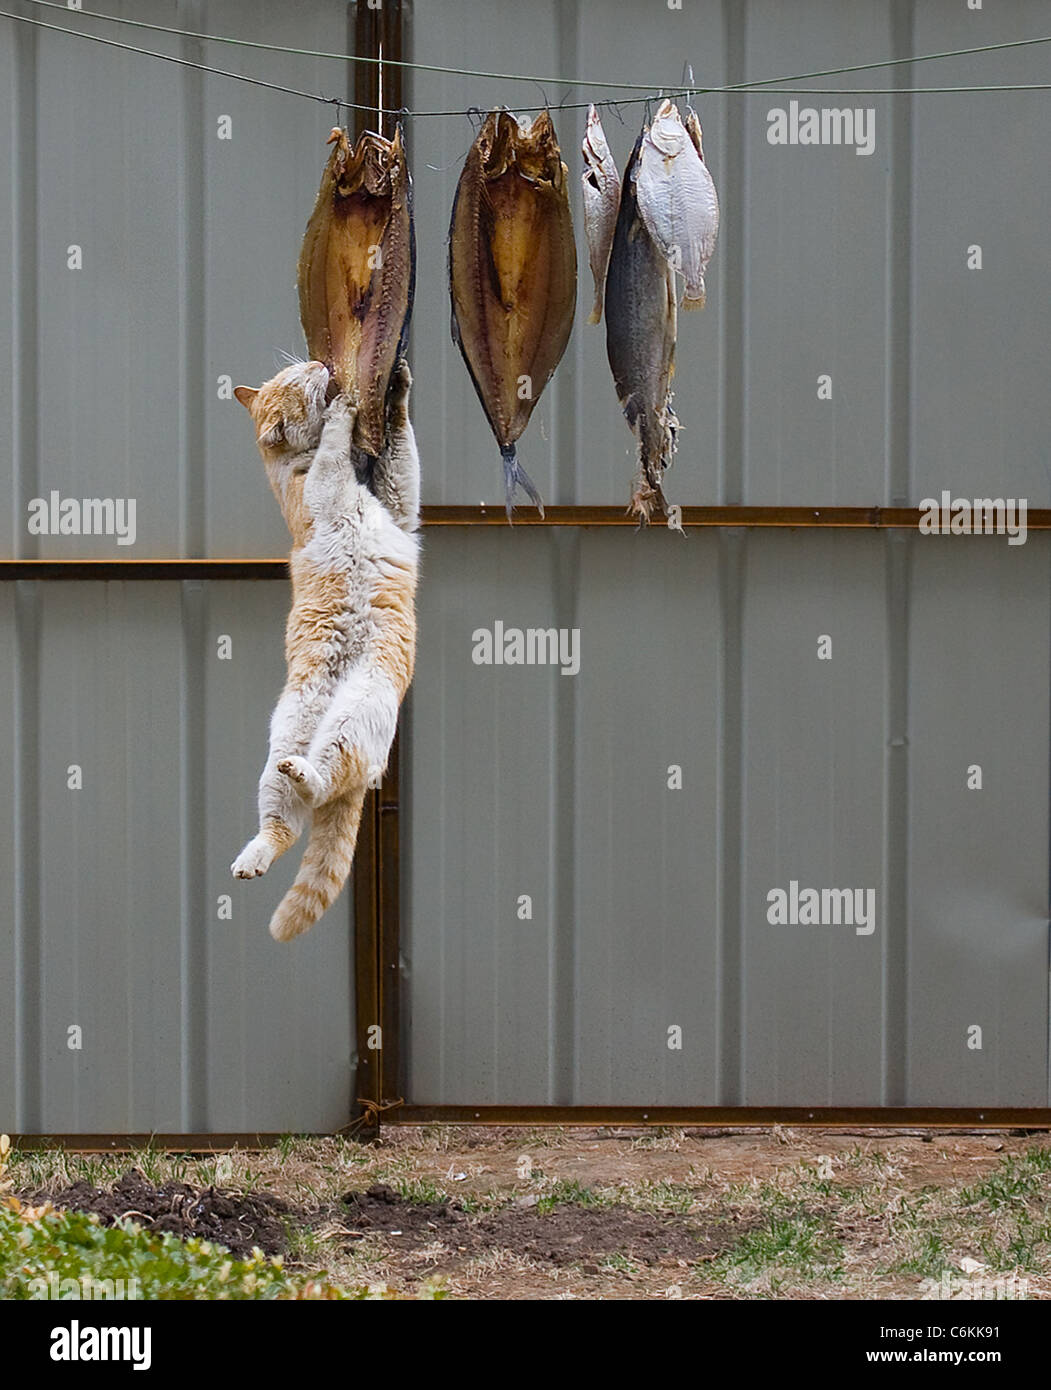 Greedy cat smells something fishy This greedy cat tries desperately to get its claws on some tasty dried fish. The fat feline Stock Photo